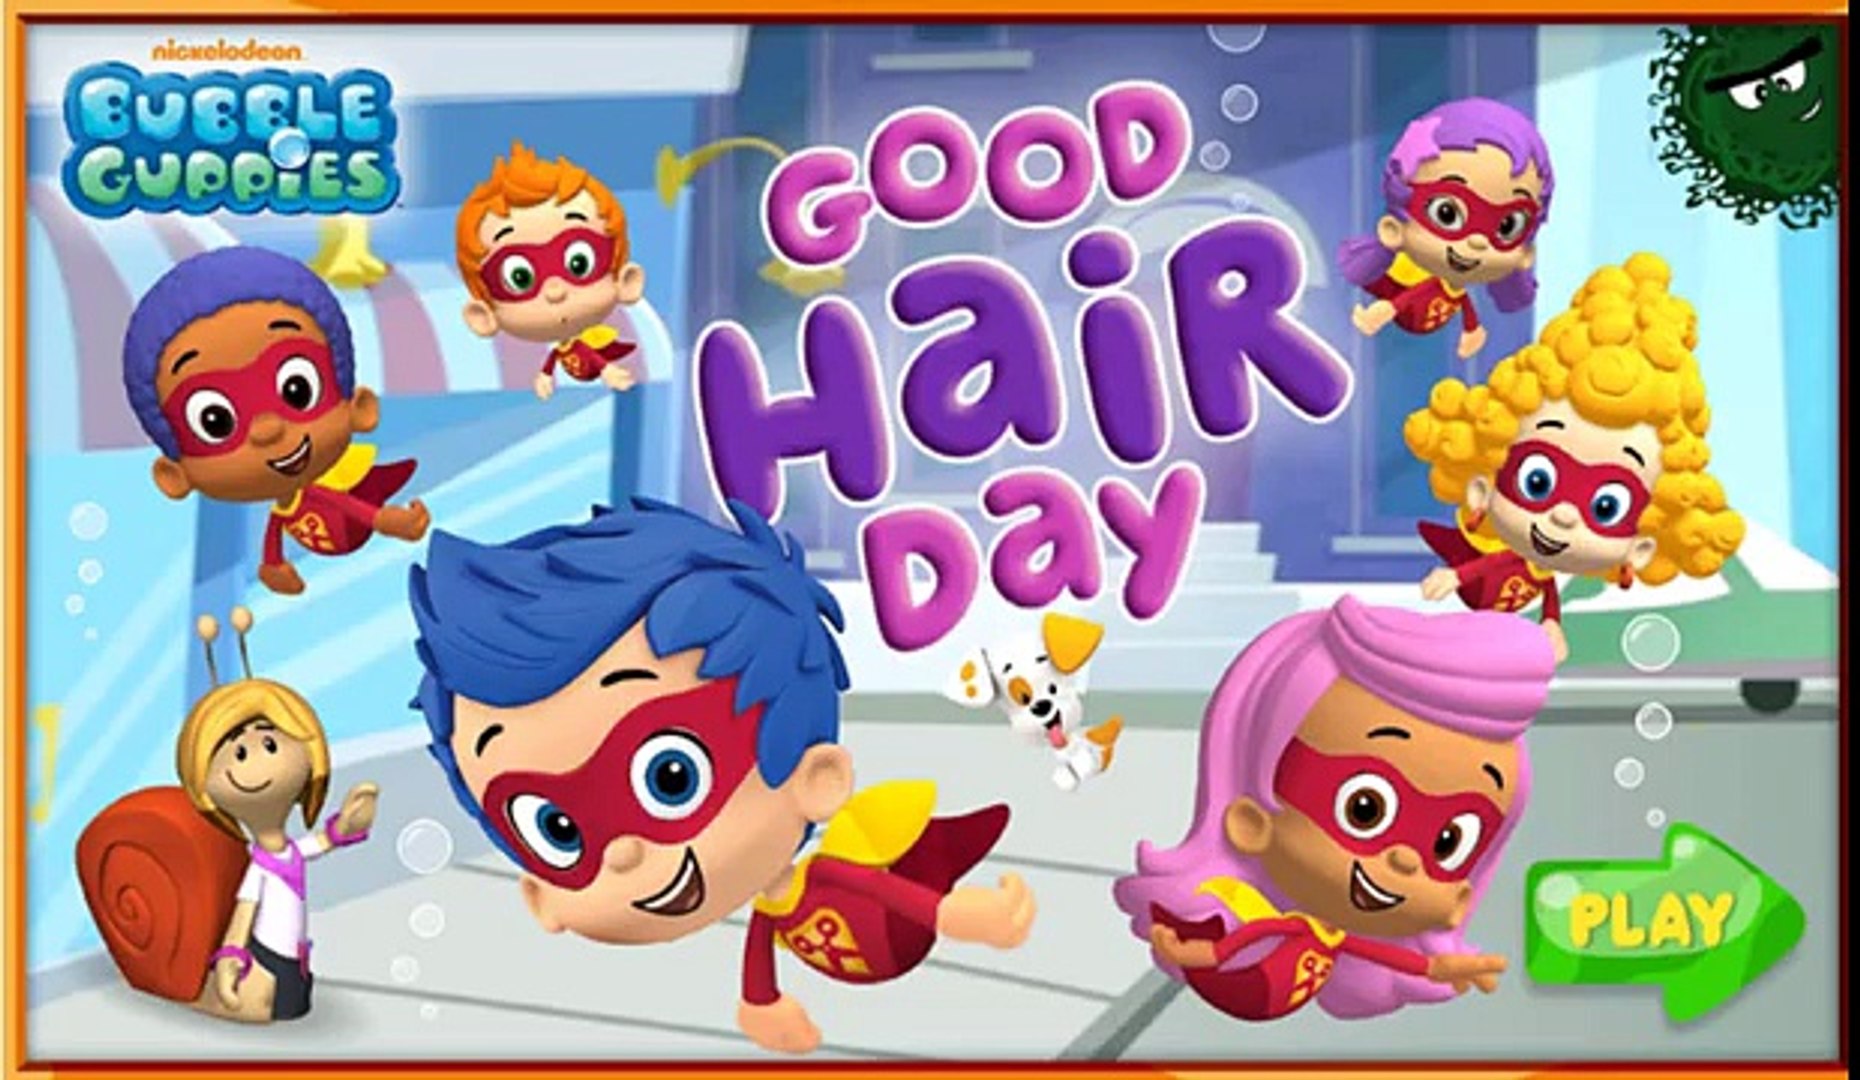 Bubble Guppies - Good Hair Day - Dailymotion Video